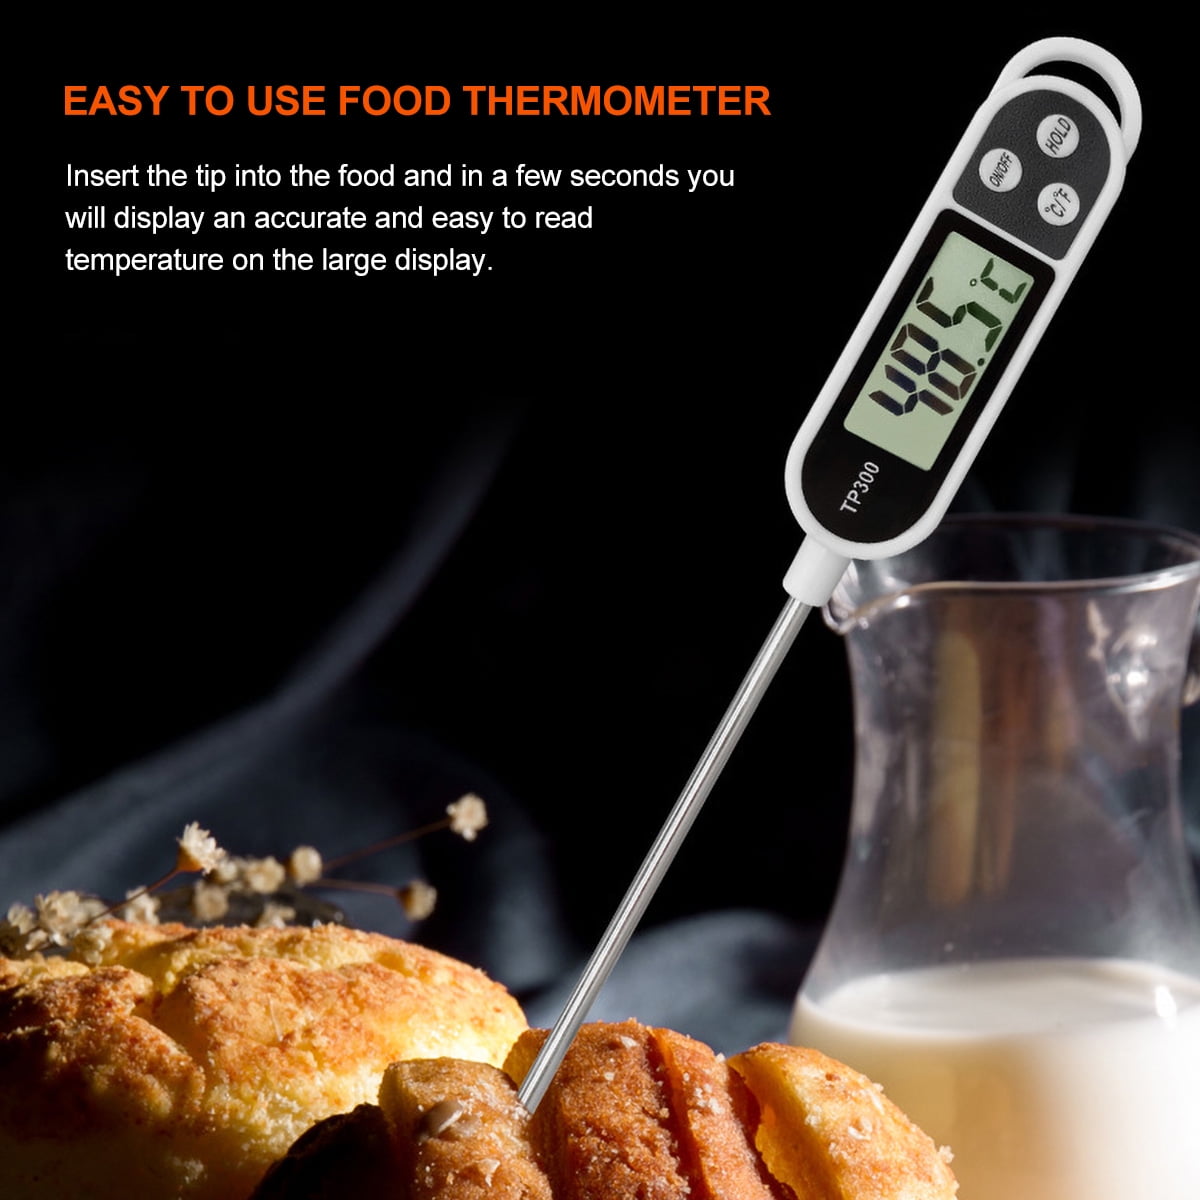 Cheer Collection Digital Meat Thermometer, Instant Read Food Thermometer  with Backlight LCD Screen, Foldable Cooking Thermometer for BBQ and Kitchen  - Cheer Collection